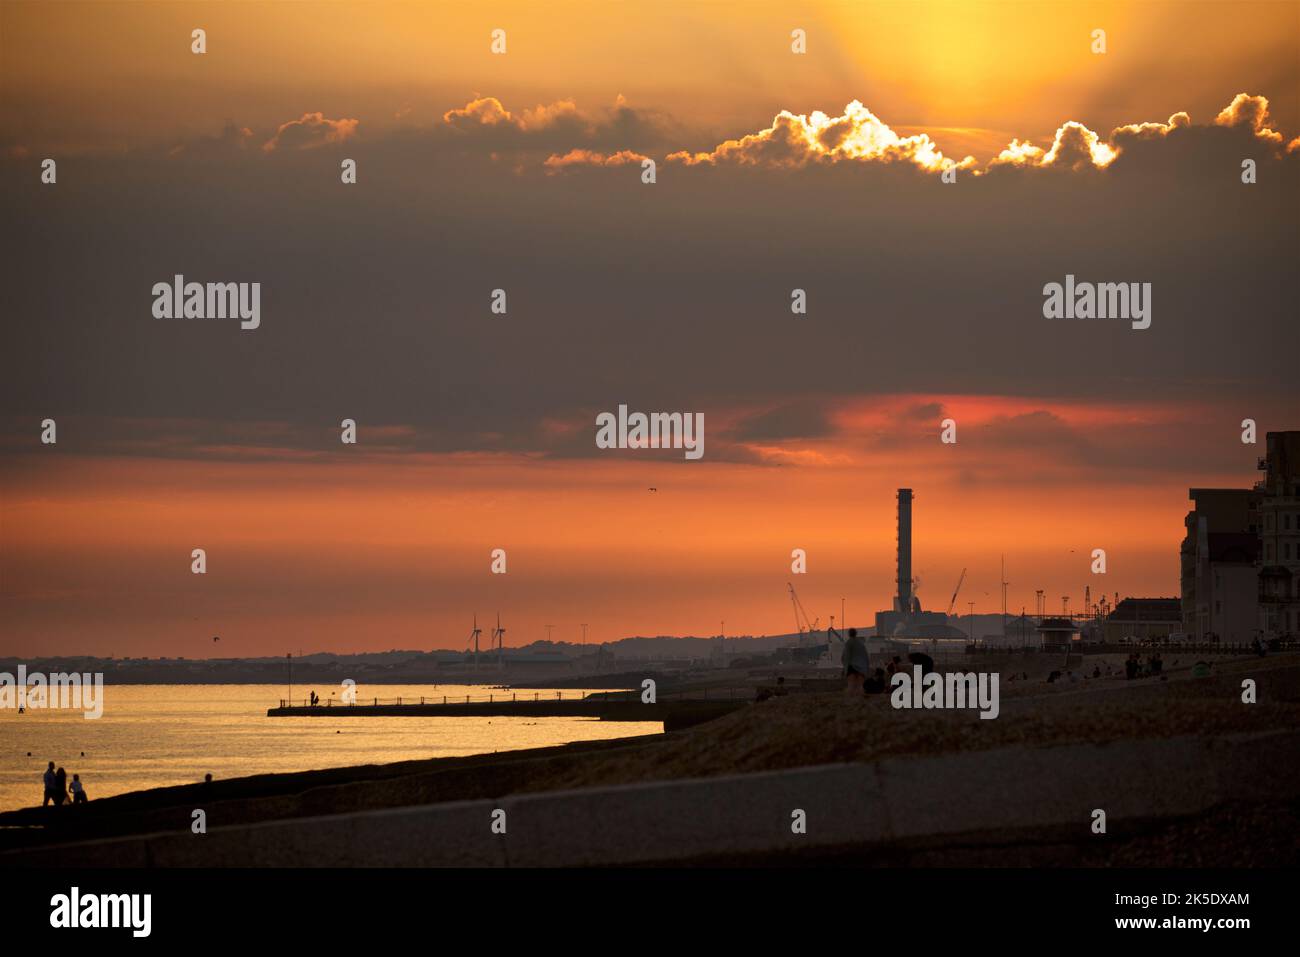 Shoreham Power Station in the distance taken from beach in Hove. Sunset and moody clouds in the sky. Stock Photo